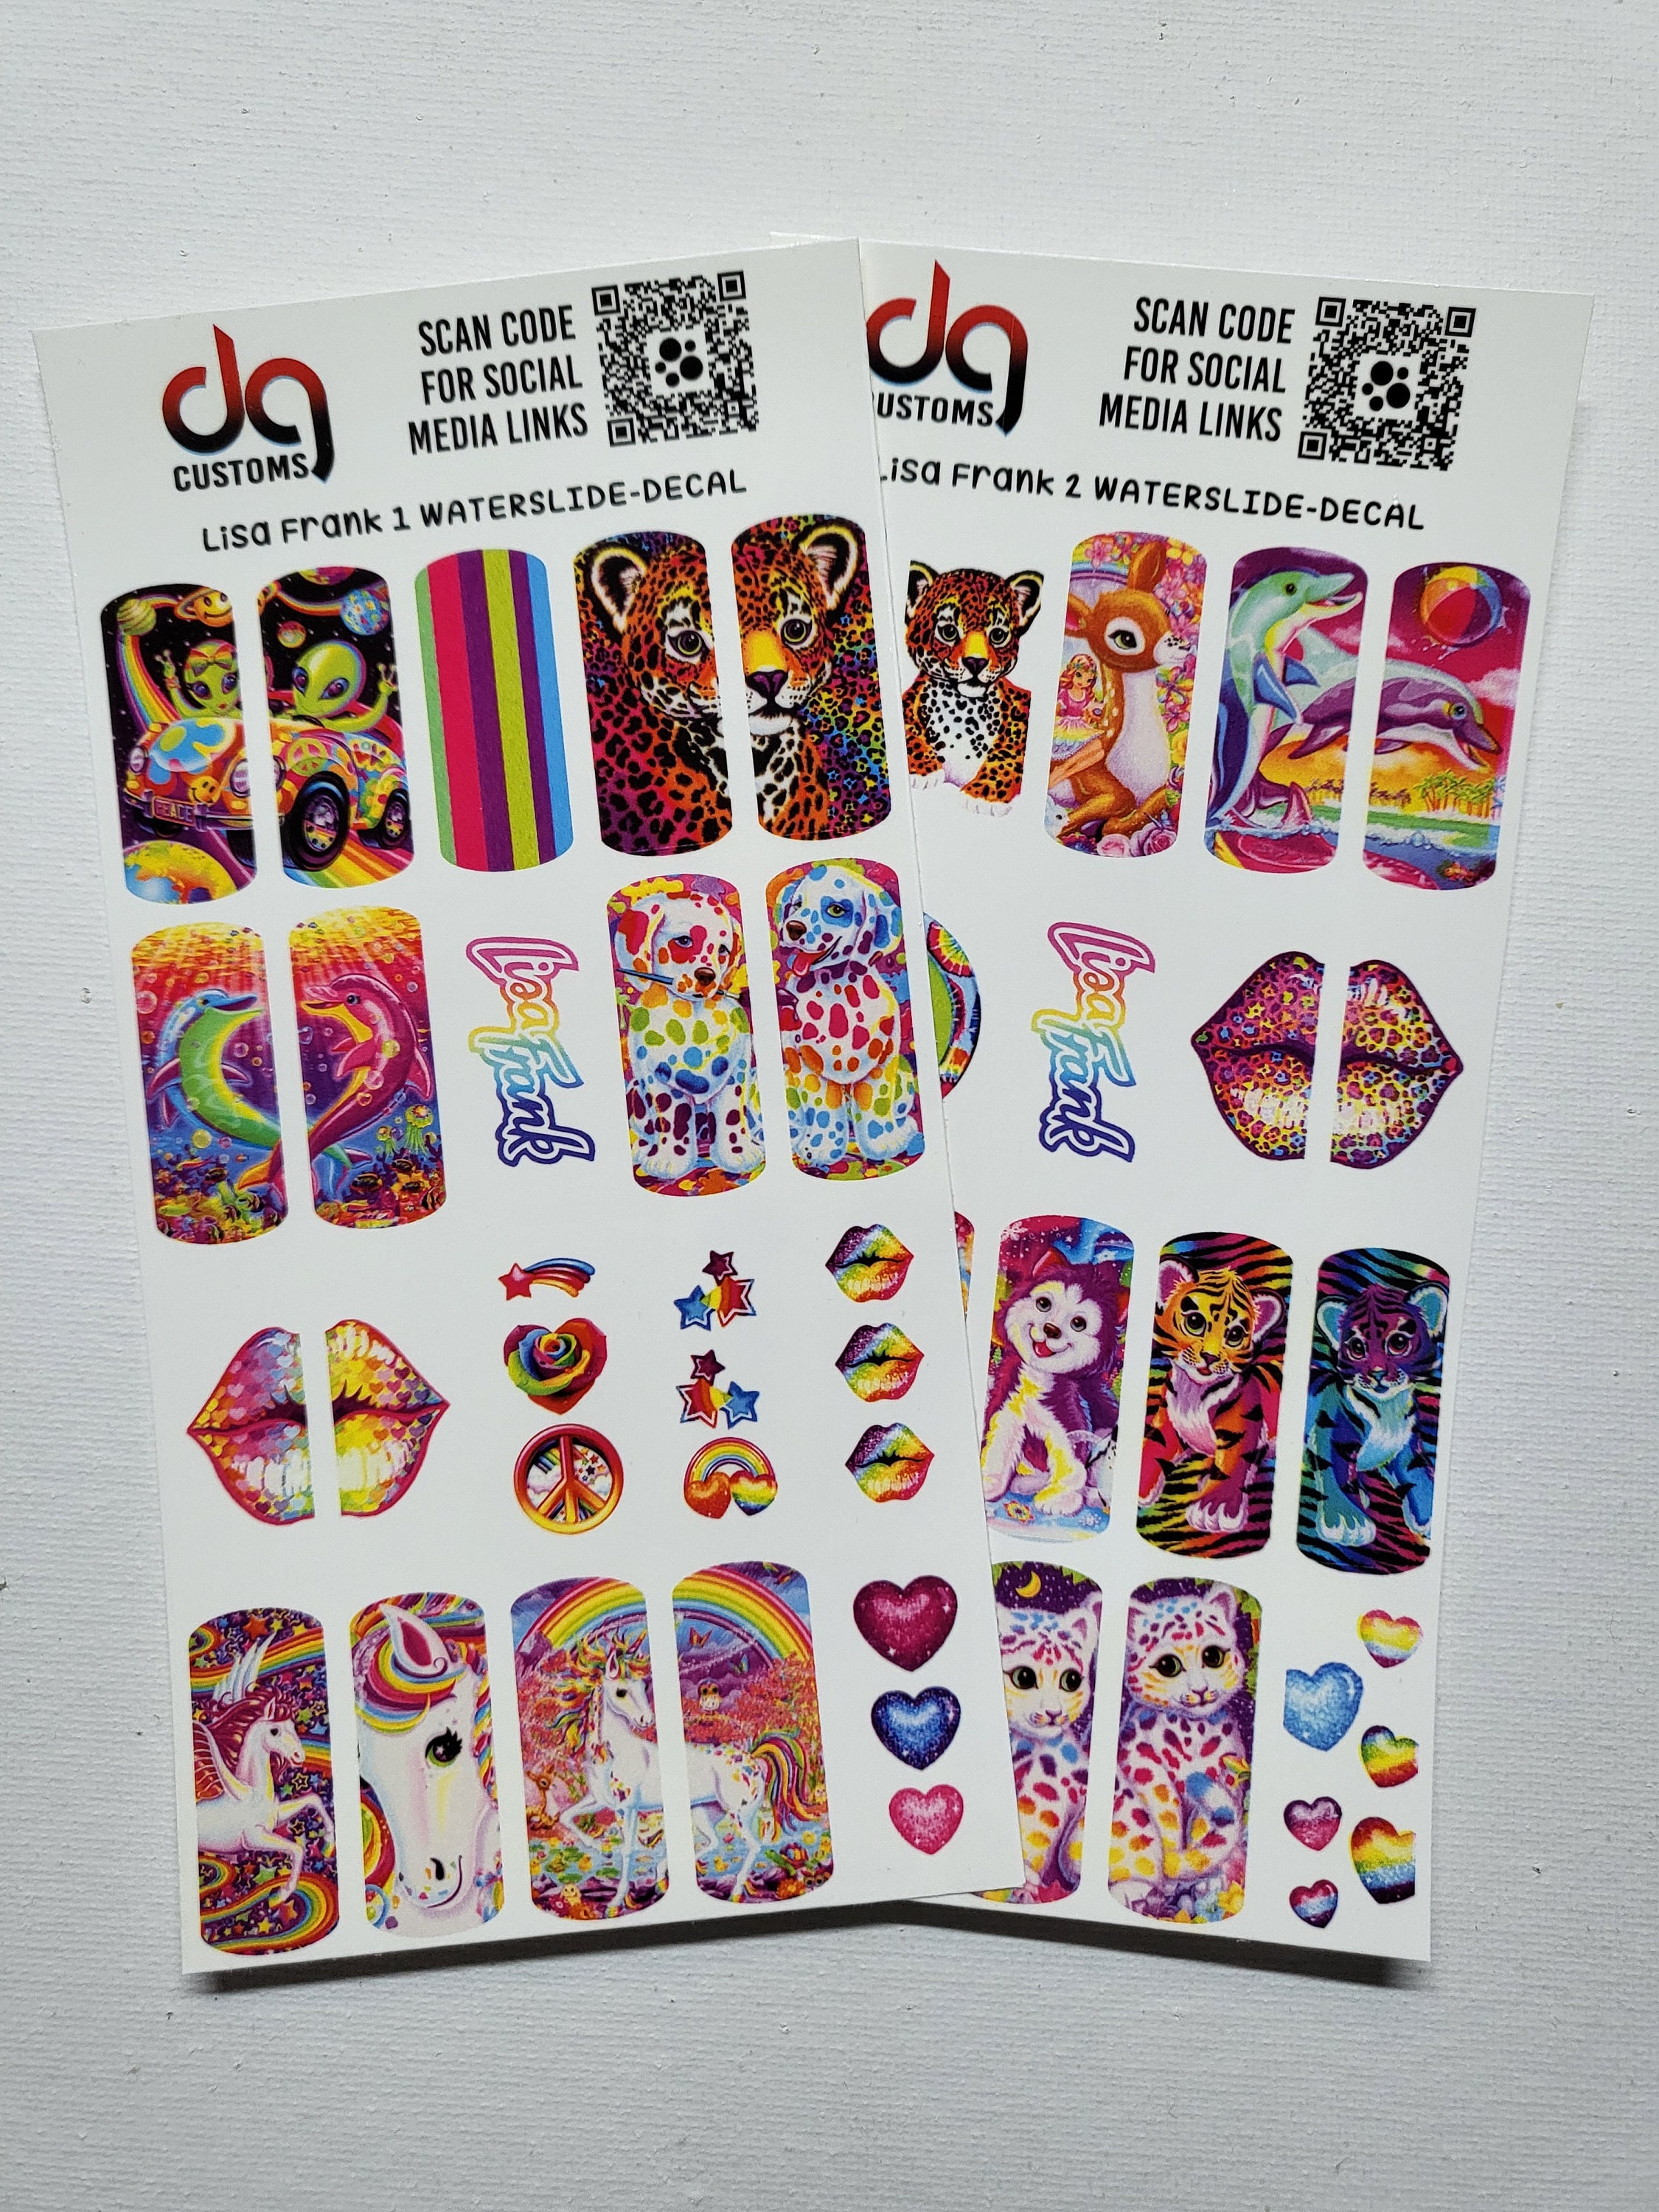 Lisa Frank Stickers - Brought so much colour to my childhood : r/nostalgia